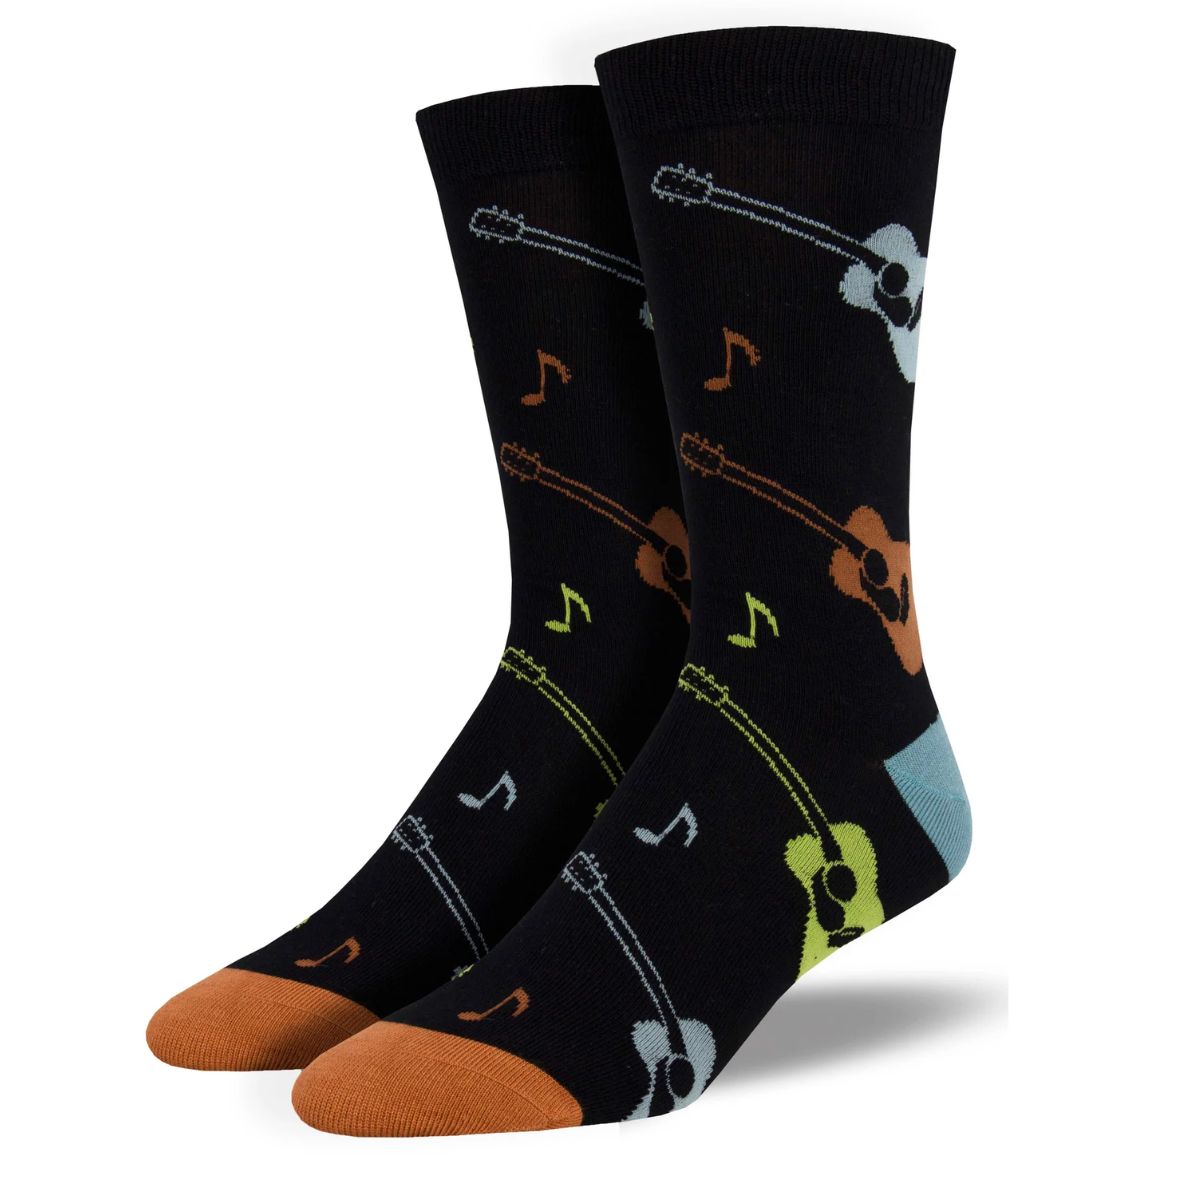 Listen to the music socks a pair of black crew socks with guitar and music print